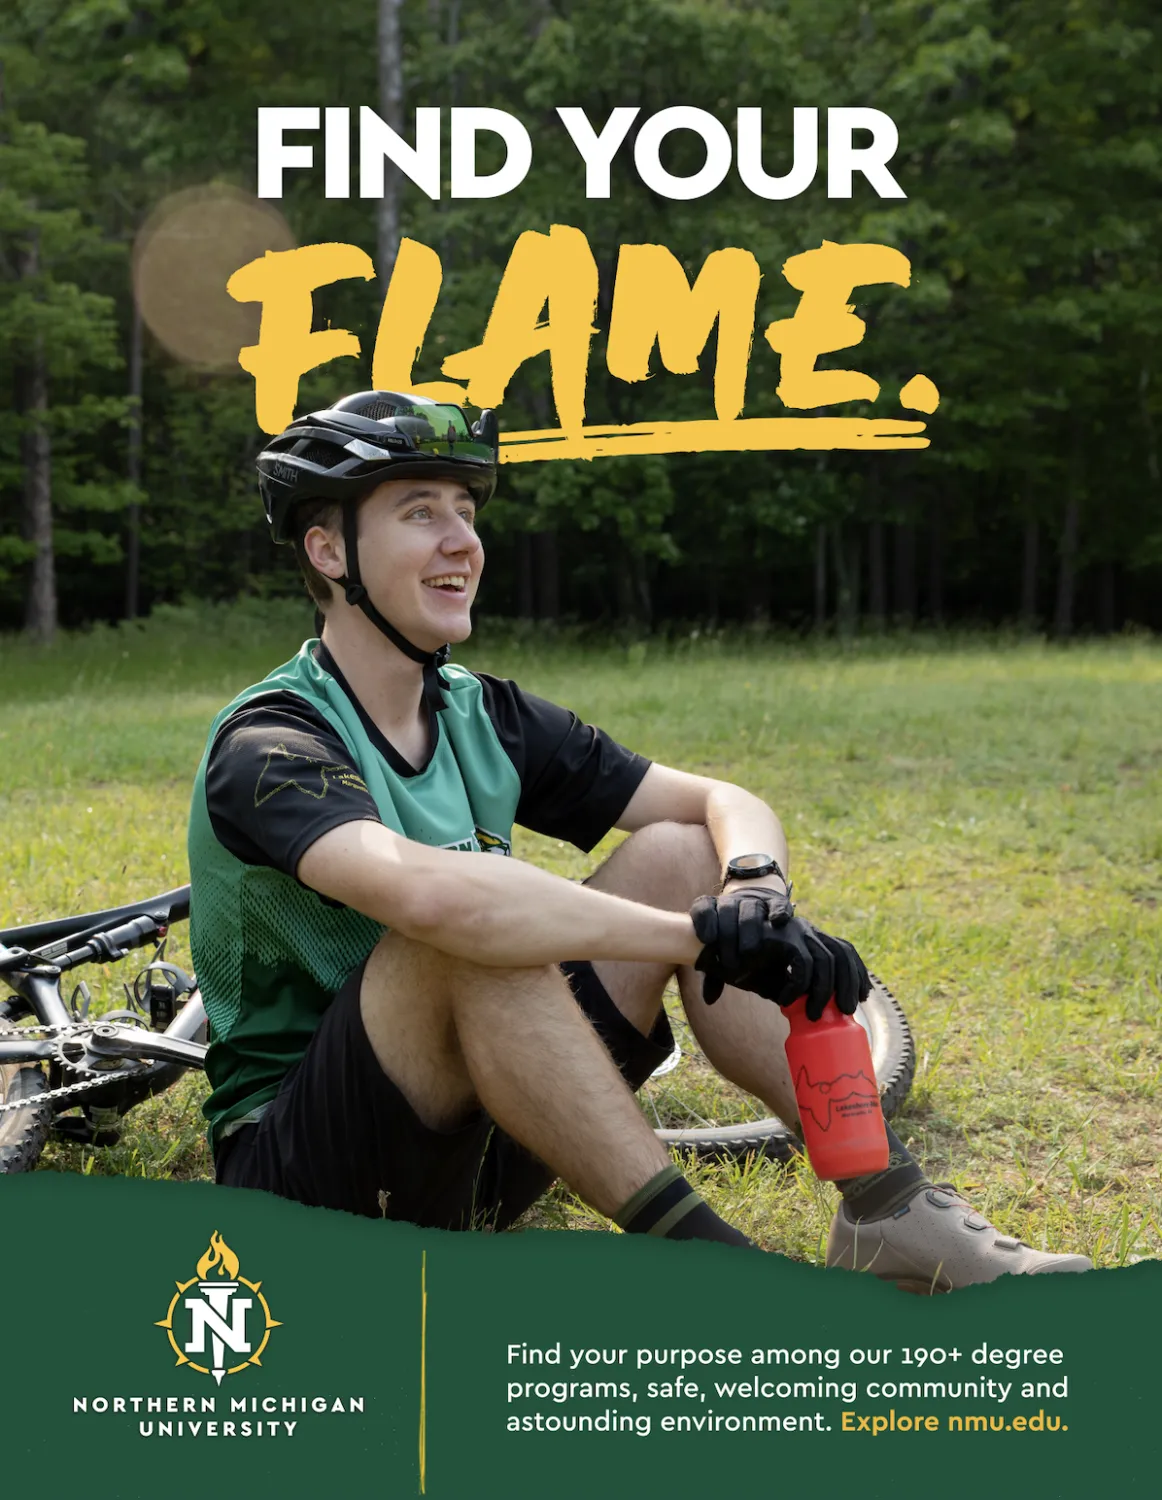 Find Your Flame poster featuring male student in bike racing gear